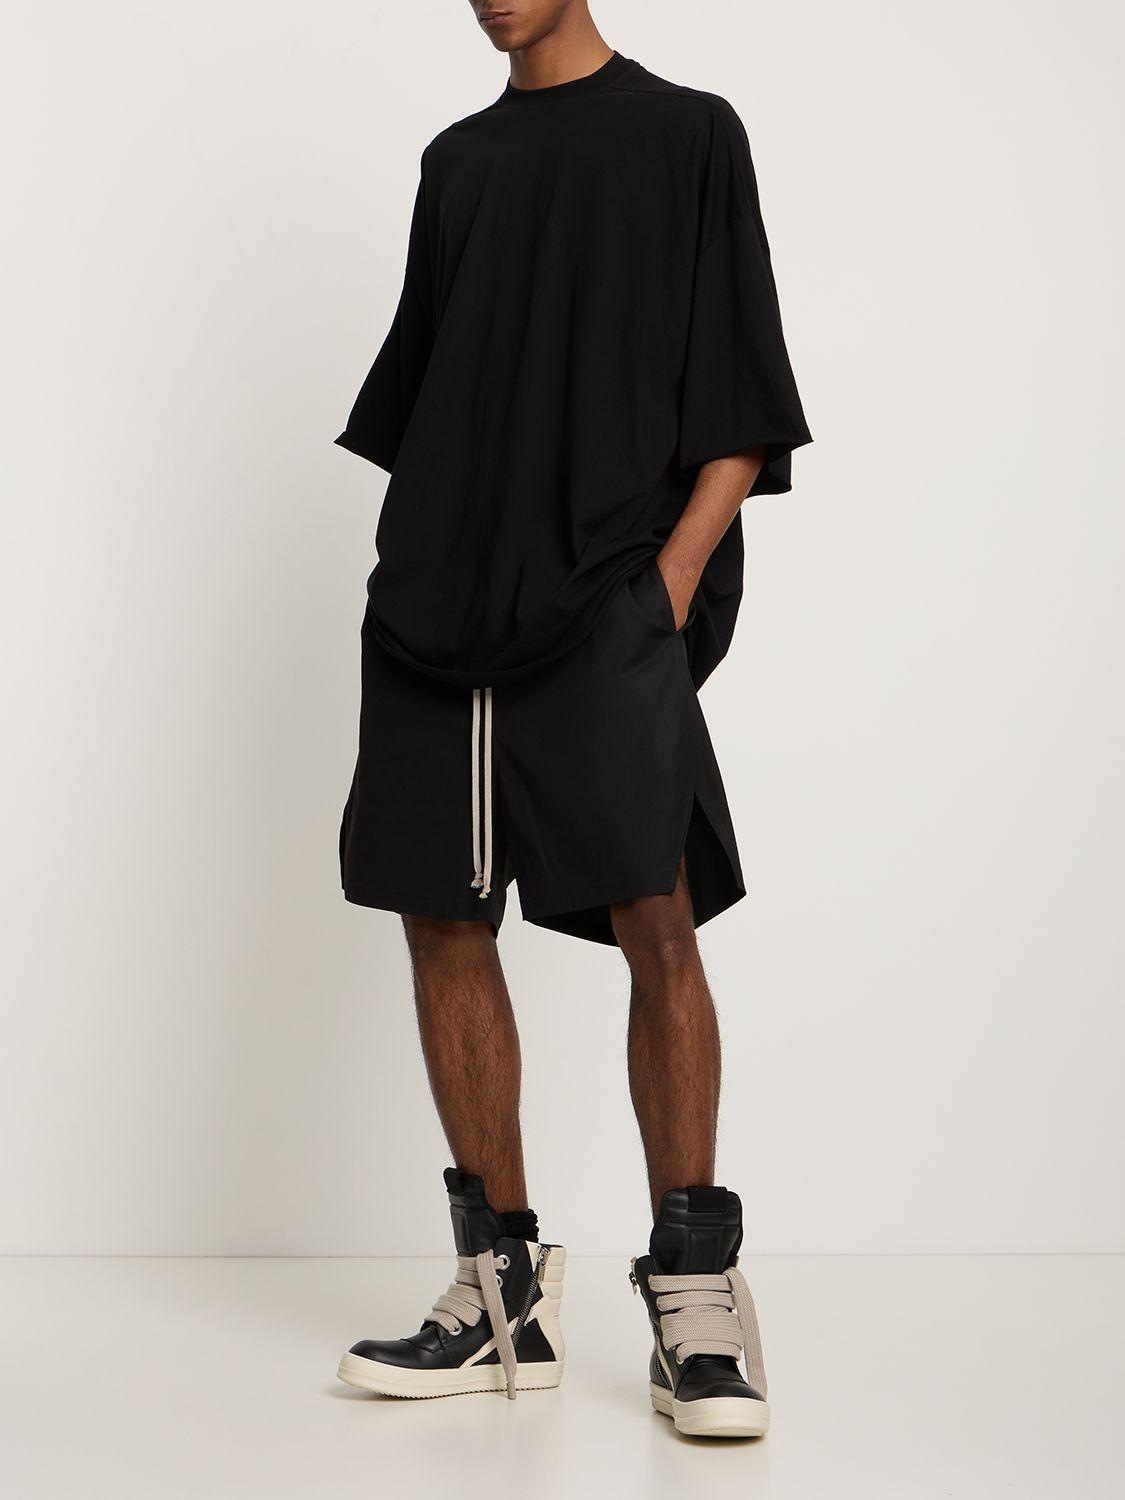 Rick Owens Tommy Cotton Jersey T-shirt in Black for Men | Lyst